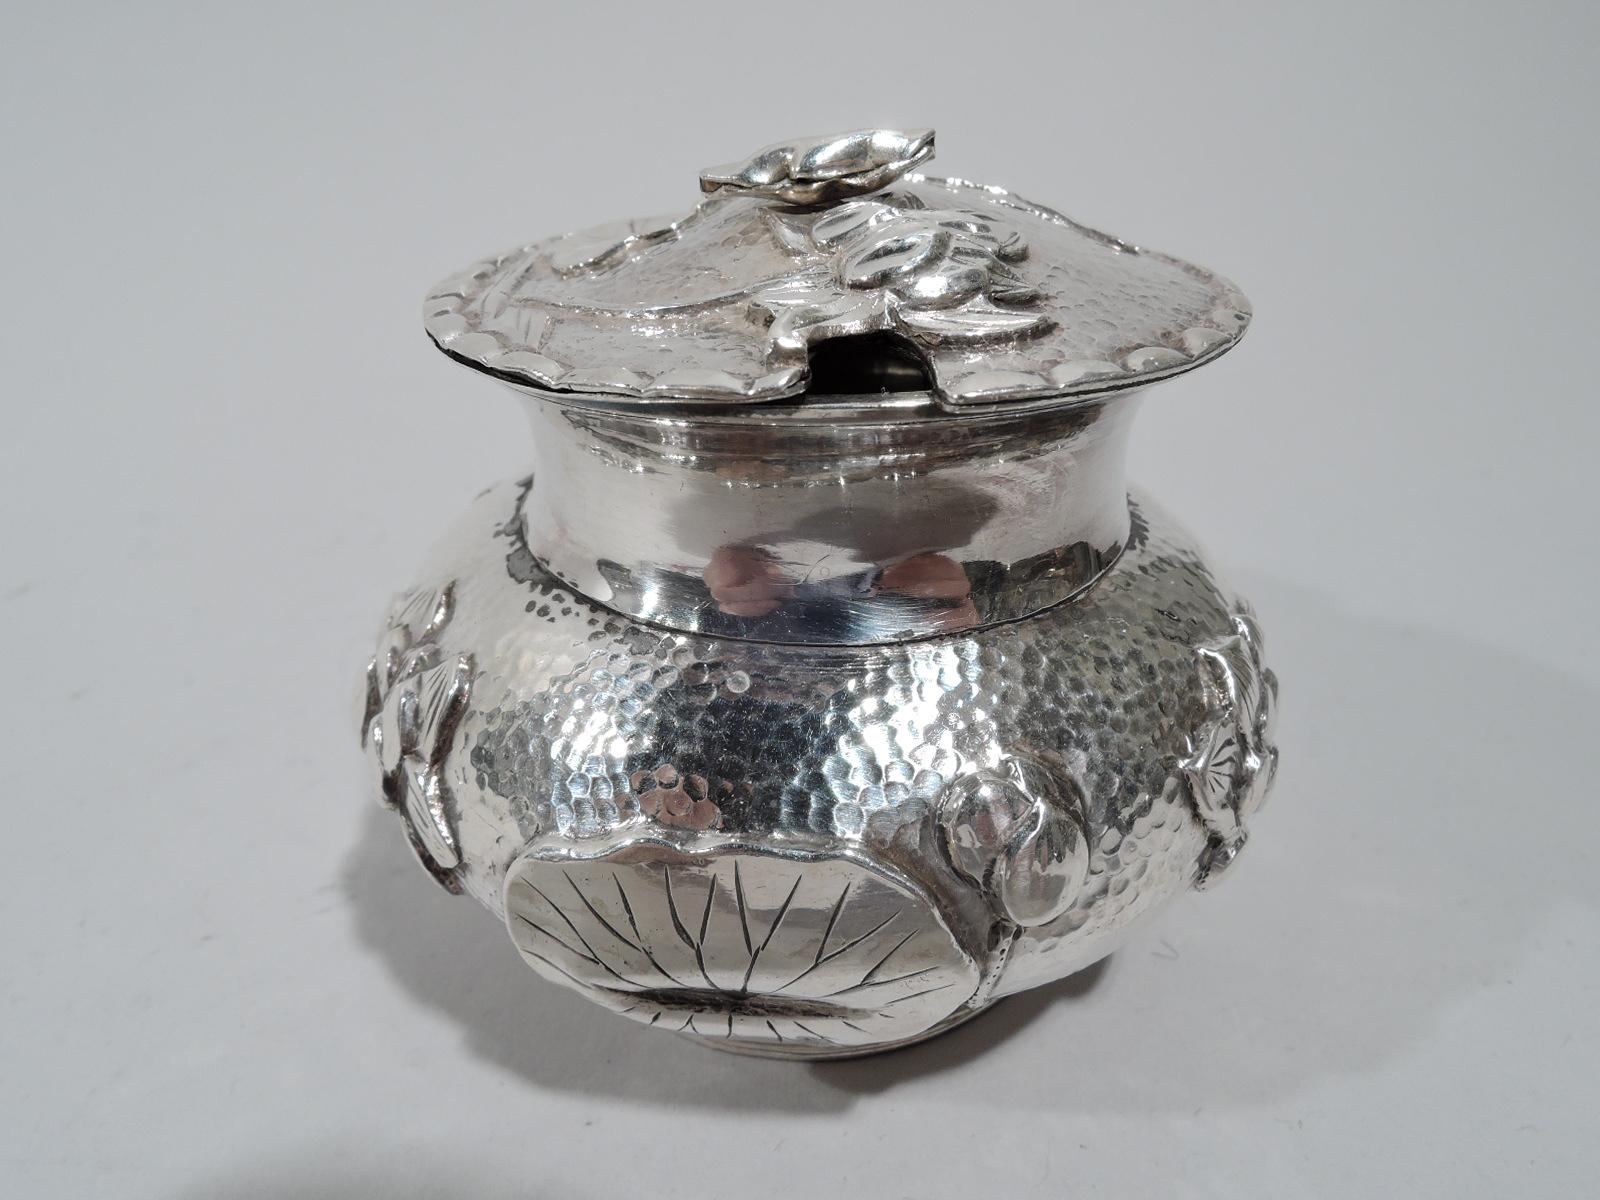 Turn-of-the-century Chinese silver mustard pot. Round and bellied bowl with plain concave neck, thin scroll handle, and spread foot. Modish floral ornament in form of chased and applied water lilies and pads heightened with engraving on stippled